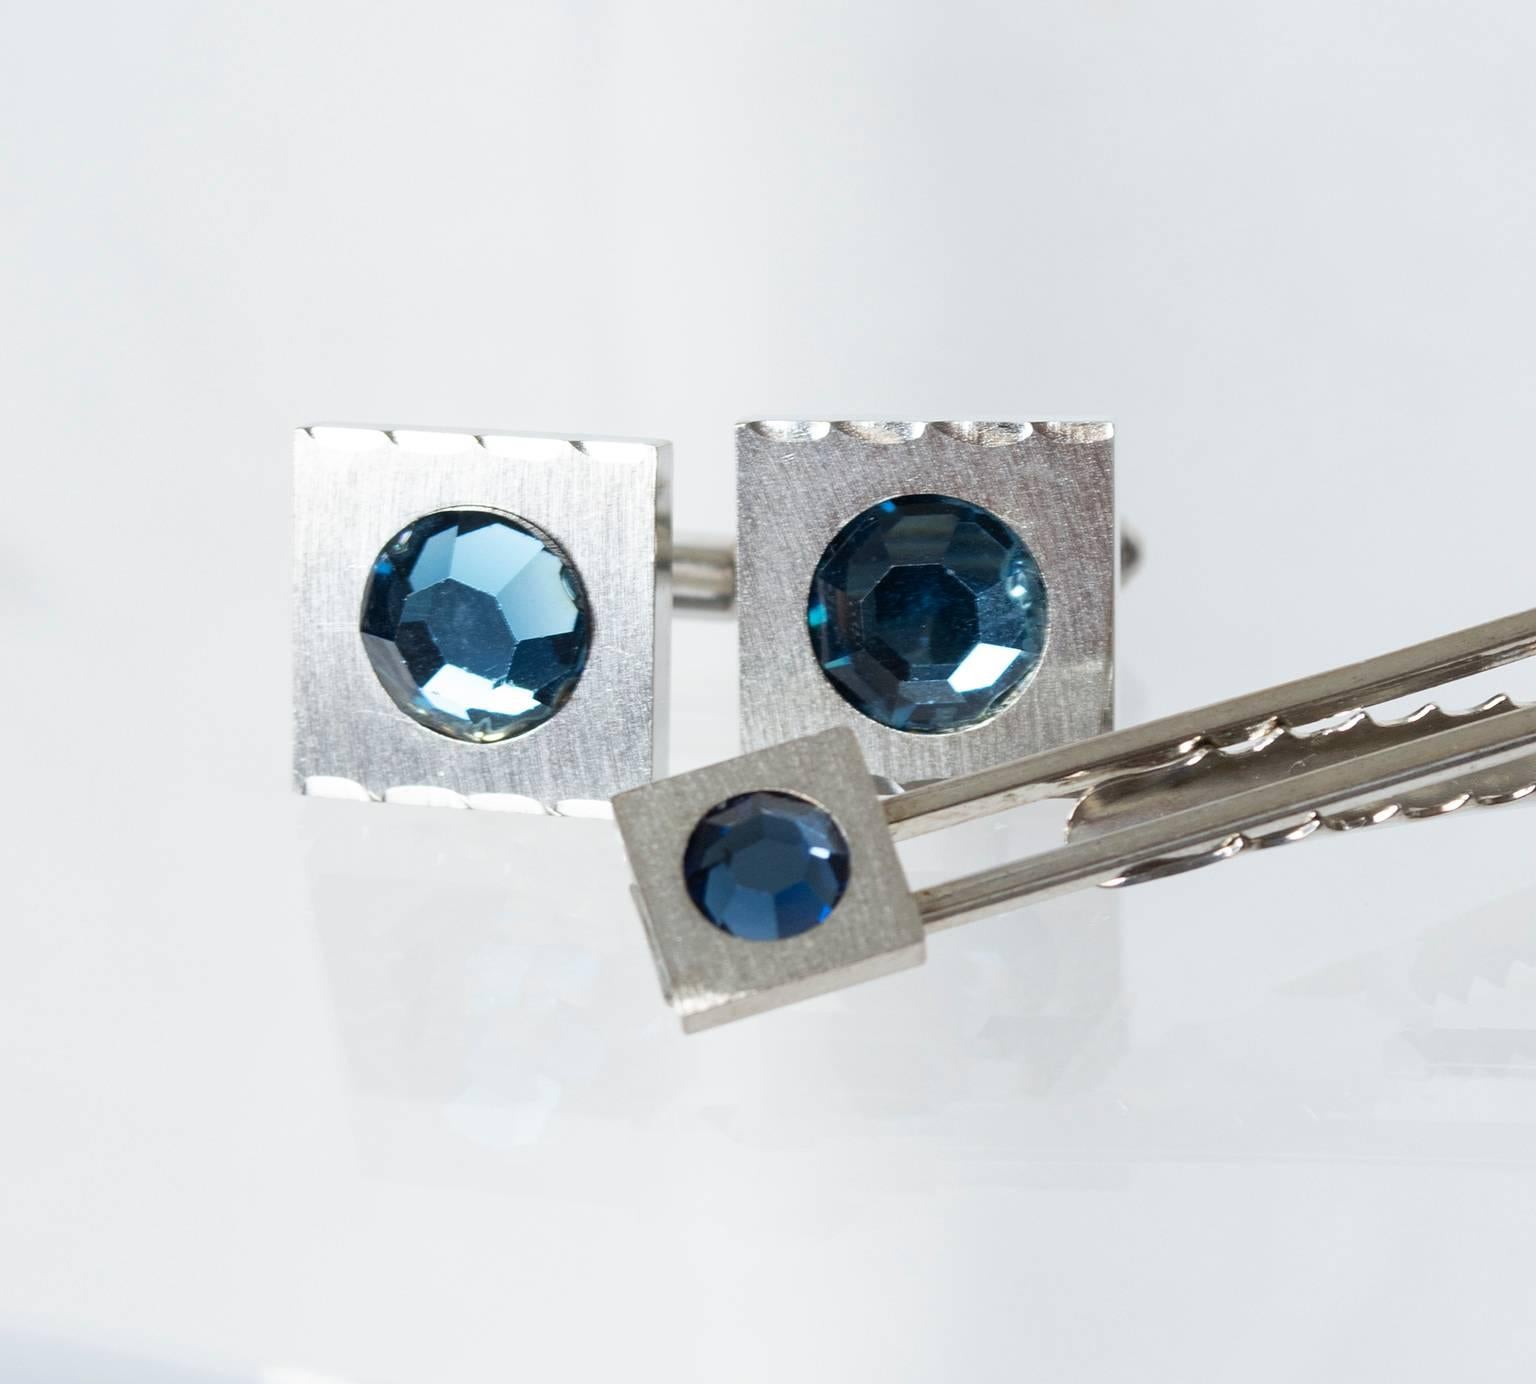 Substantial yet still understated, this tie bar and cuff link set speaks volumes at a whisper. Elegant brushed silver provides the perfect counterpoint to soothing aquamarine crystals; the fluted beveled edges are a bonus. 

Tie bar and cuff link